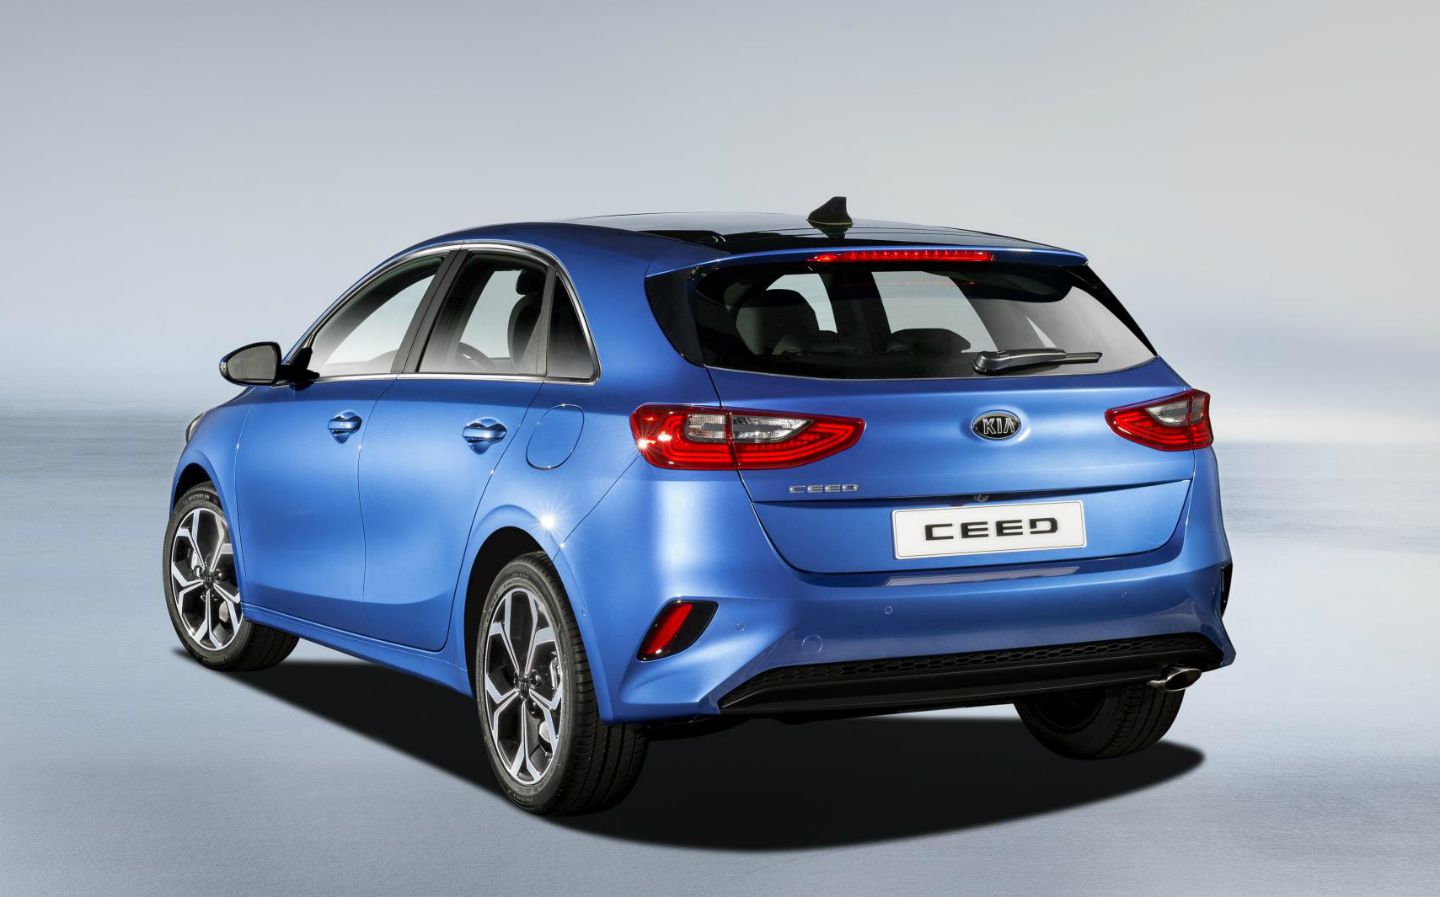 The new 'reasonably priced' Kia Ceed grows up for 2018